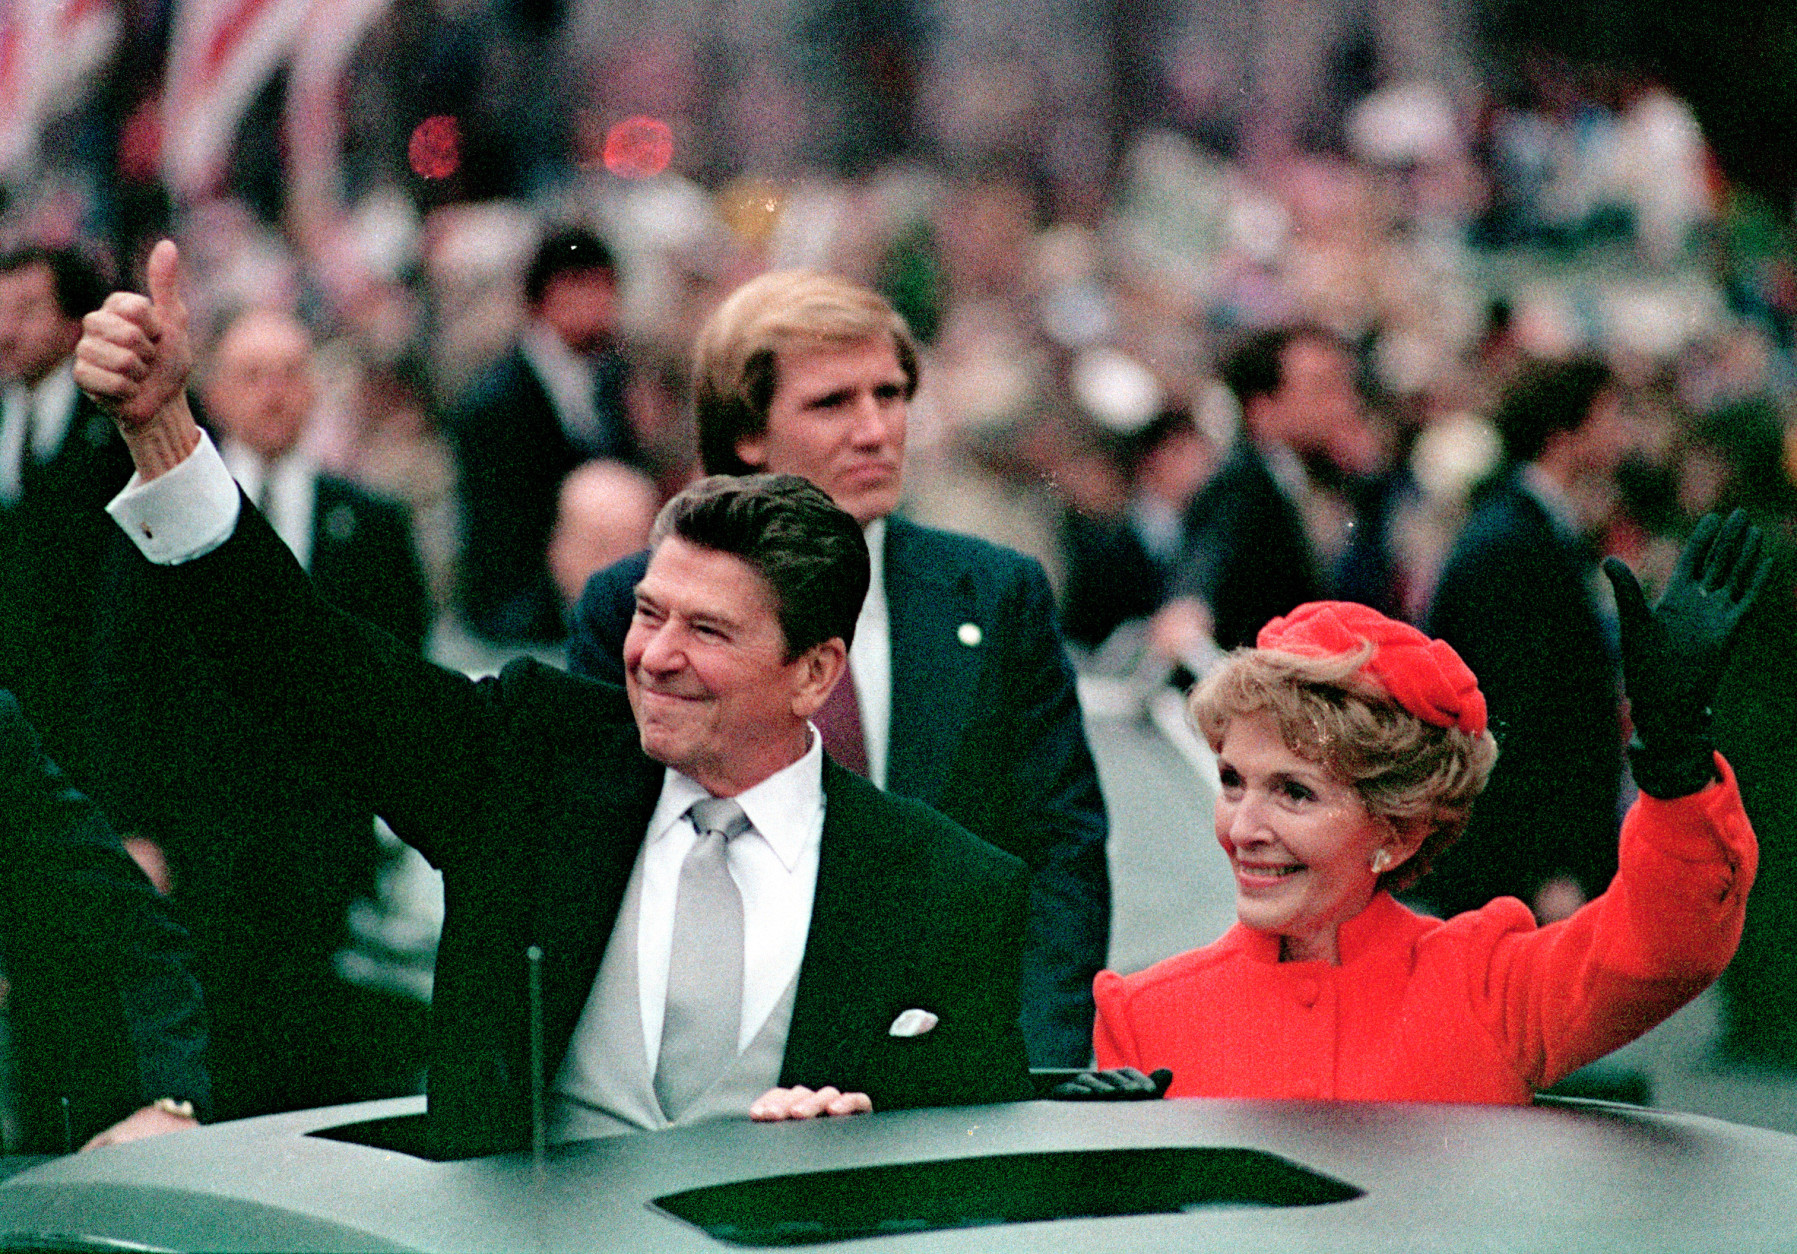 FILE- This Jan. 20, 1981 file photo, shows President Ronald Reagan as he gives a thumbs up to the crowd while his wife, first lady Nancy Reagan, waves from a limousine during the inaugural parade in Washington following Reagan's swearing in as the 40th president of the United States. Sunday, Feb. 6, 2011, marks the centennial anniversary of Reagan's birth. (AP Photo/File)